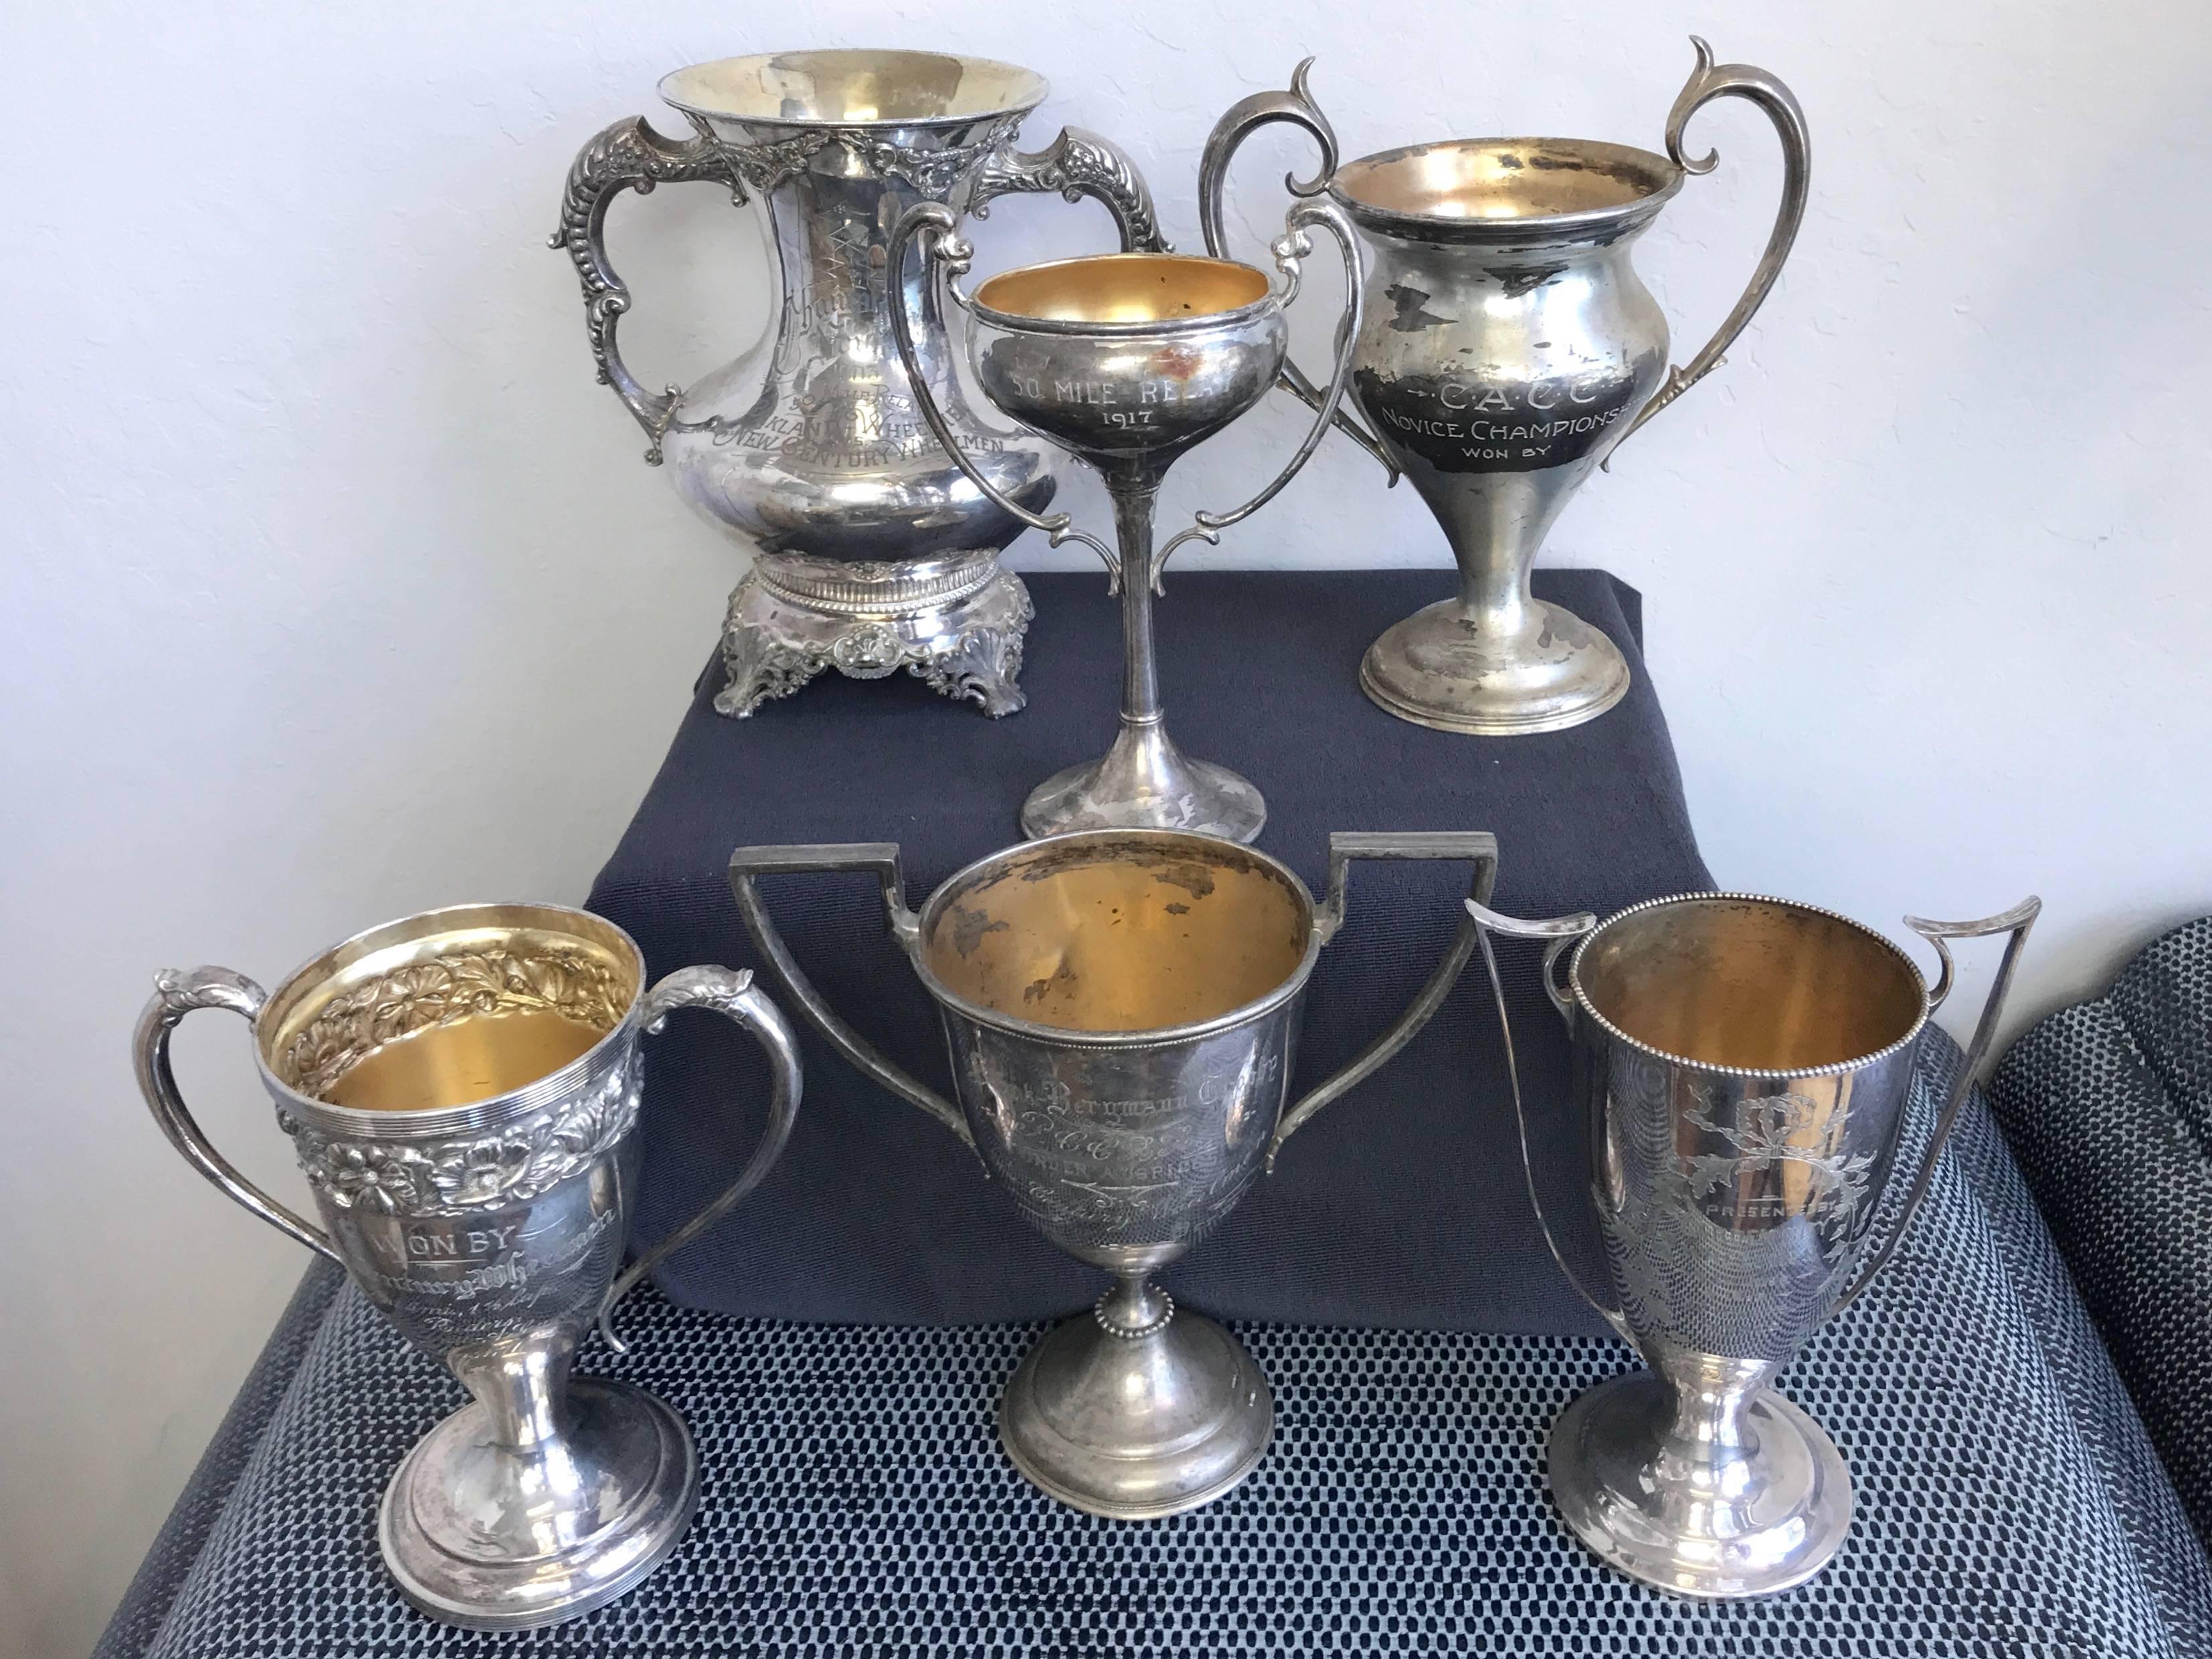 Sporting Art Group of Six Early 1900s California Bay Area Silverplate Cycling Trophies